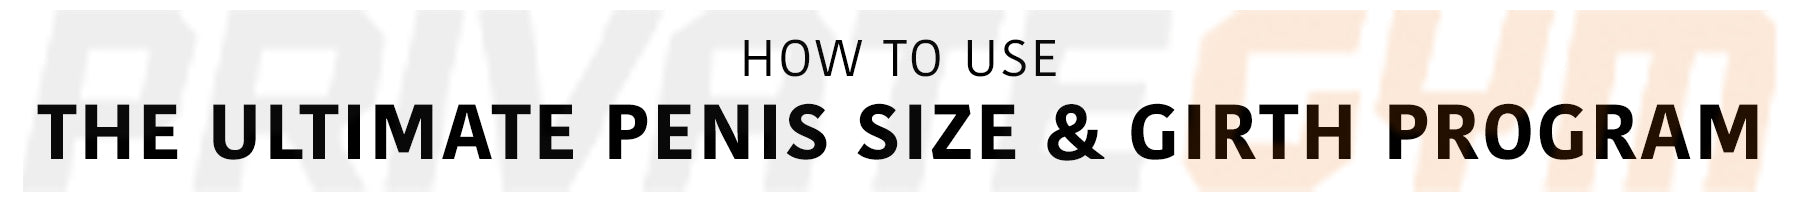 How to Use the Ultimate Penis Size & Girth Program Desktop